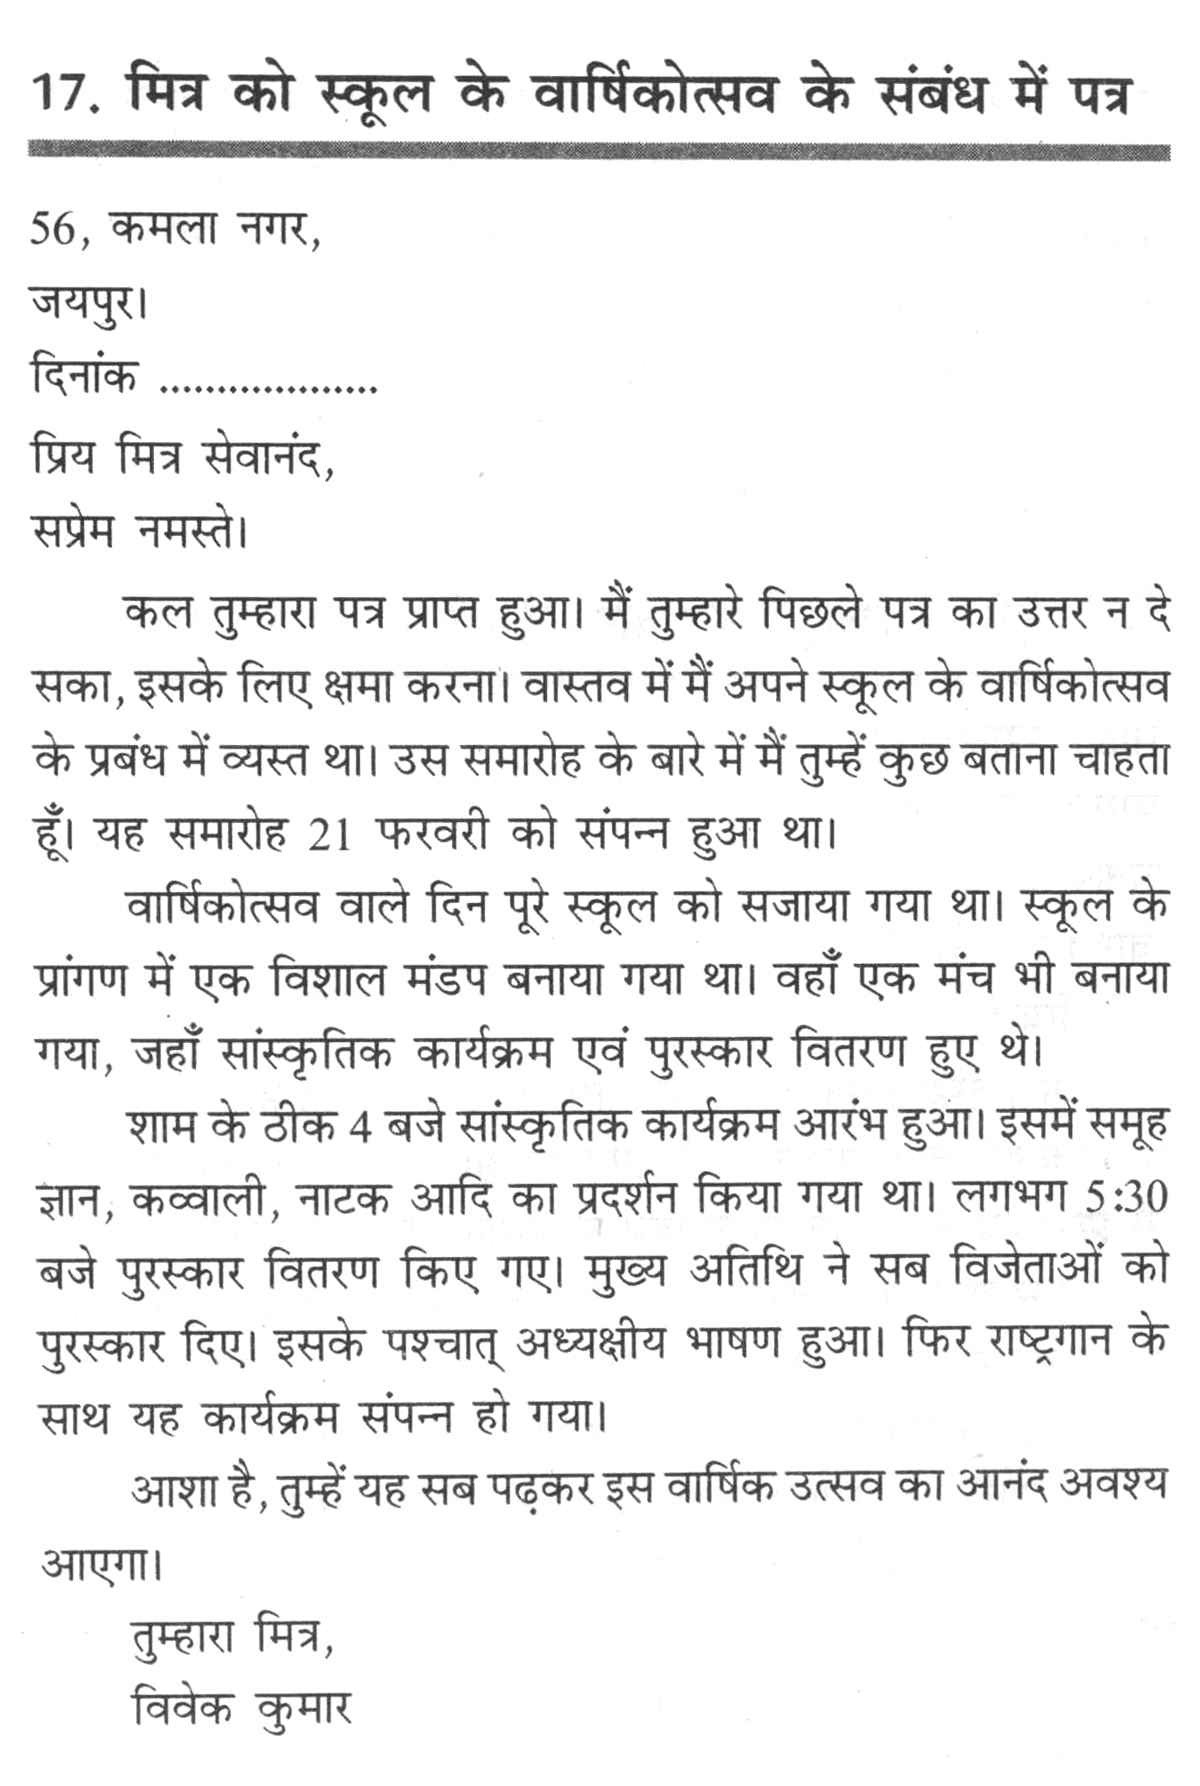 A Letter To A Friend Describing About The Annual Function In Hindi